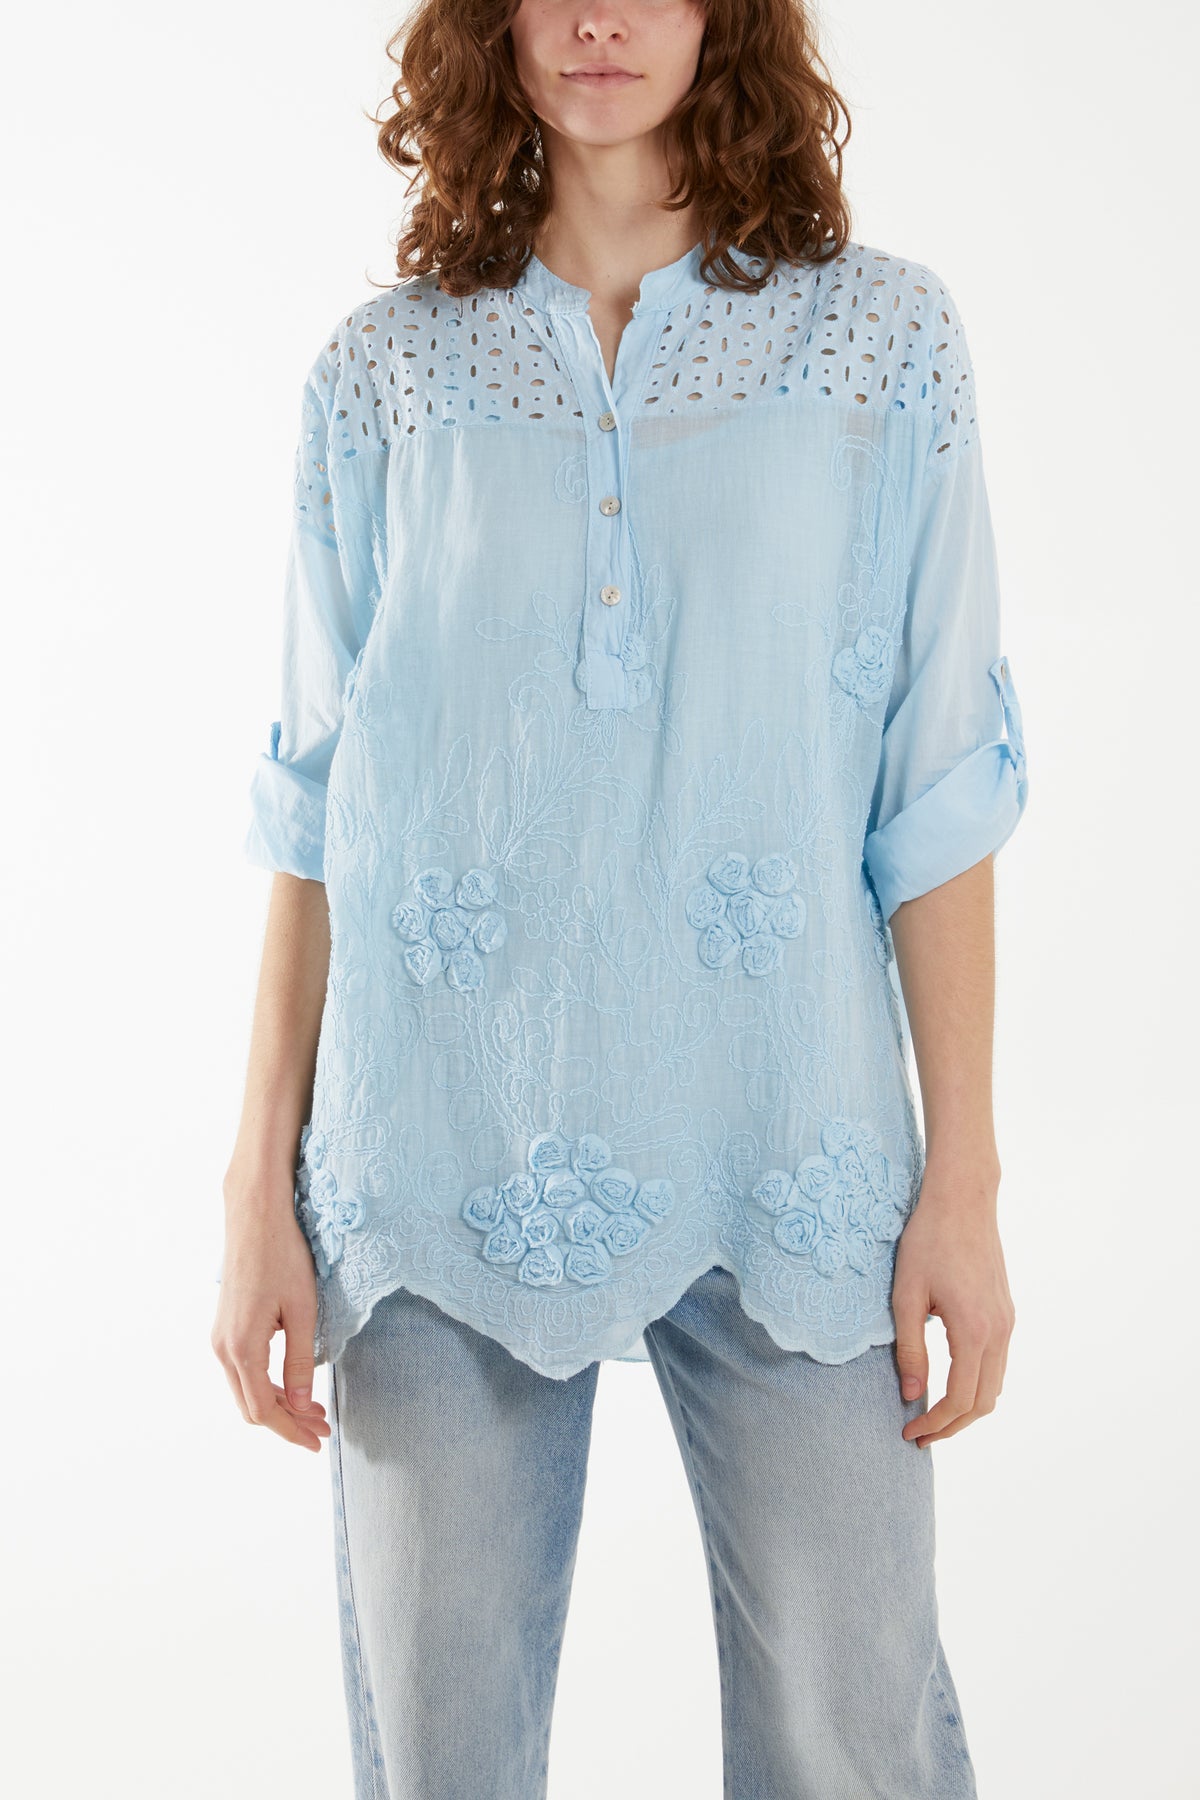 Broderie Anglaise 3D Flowers Blouse